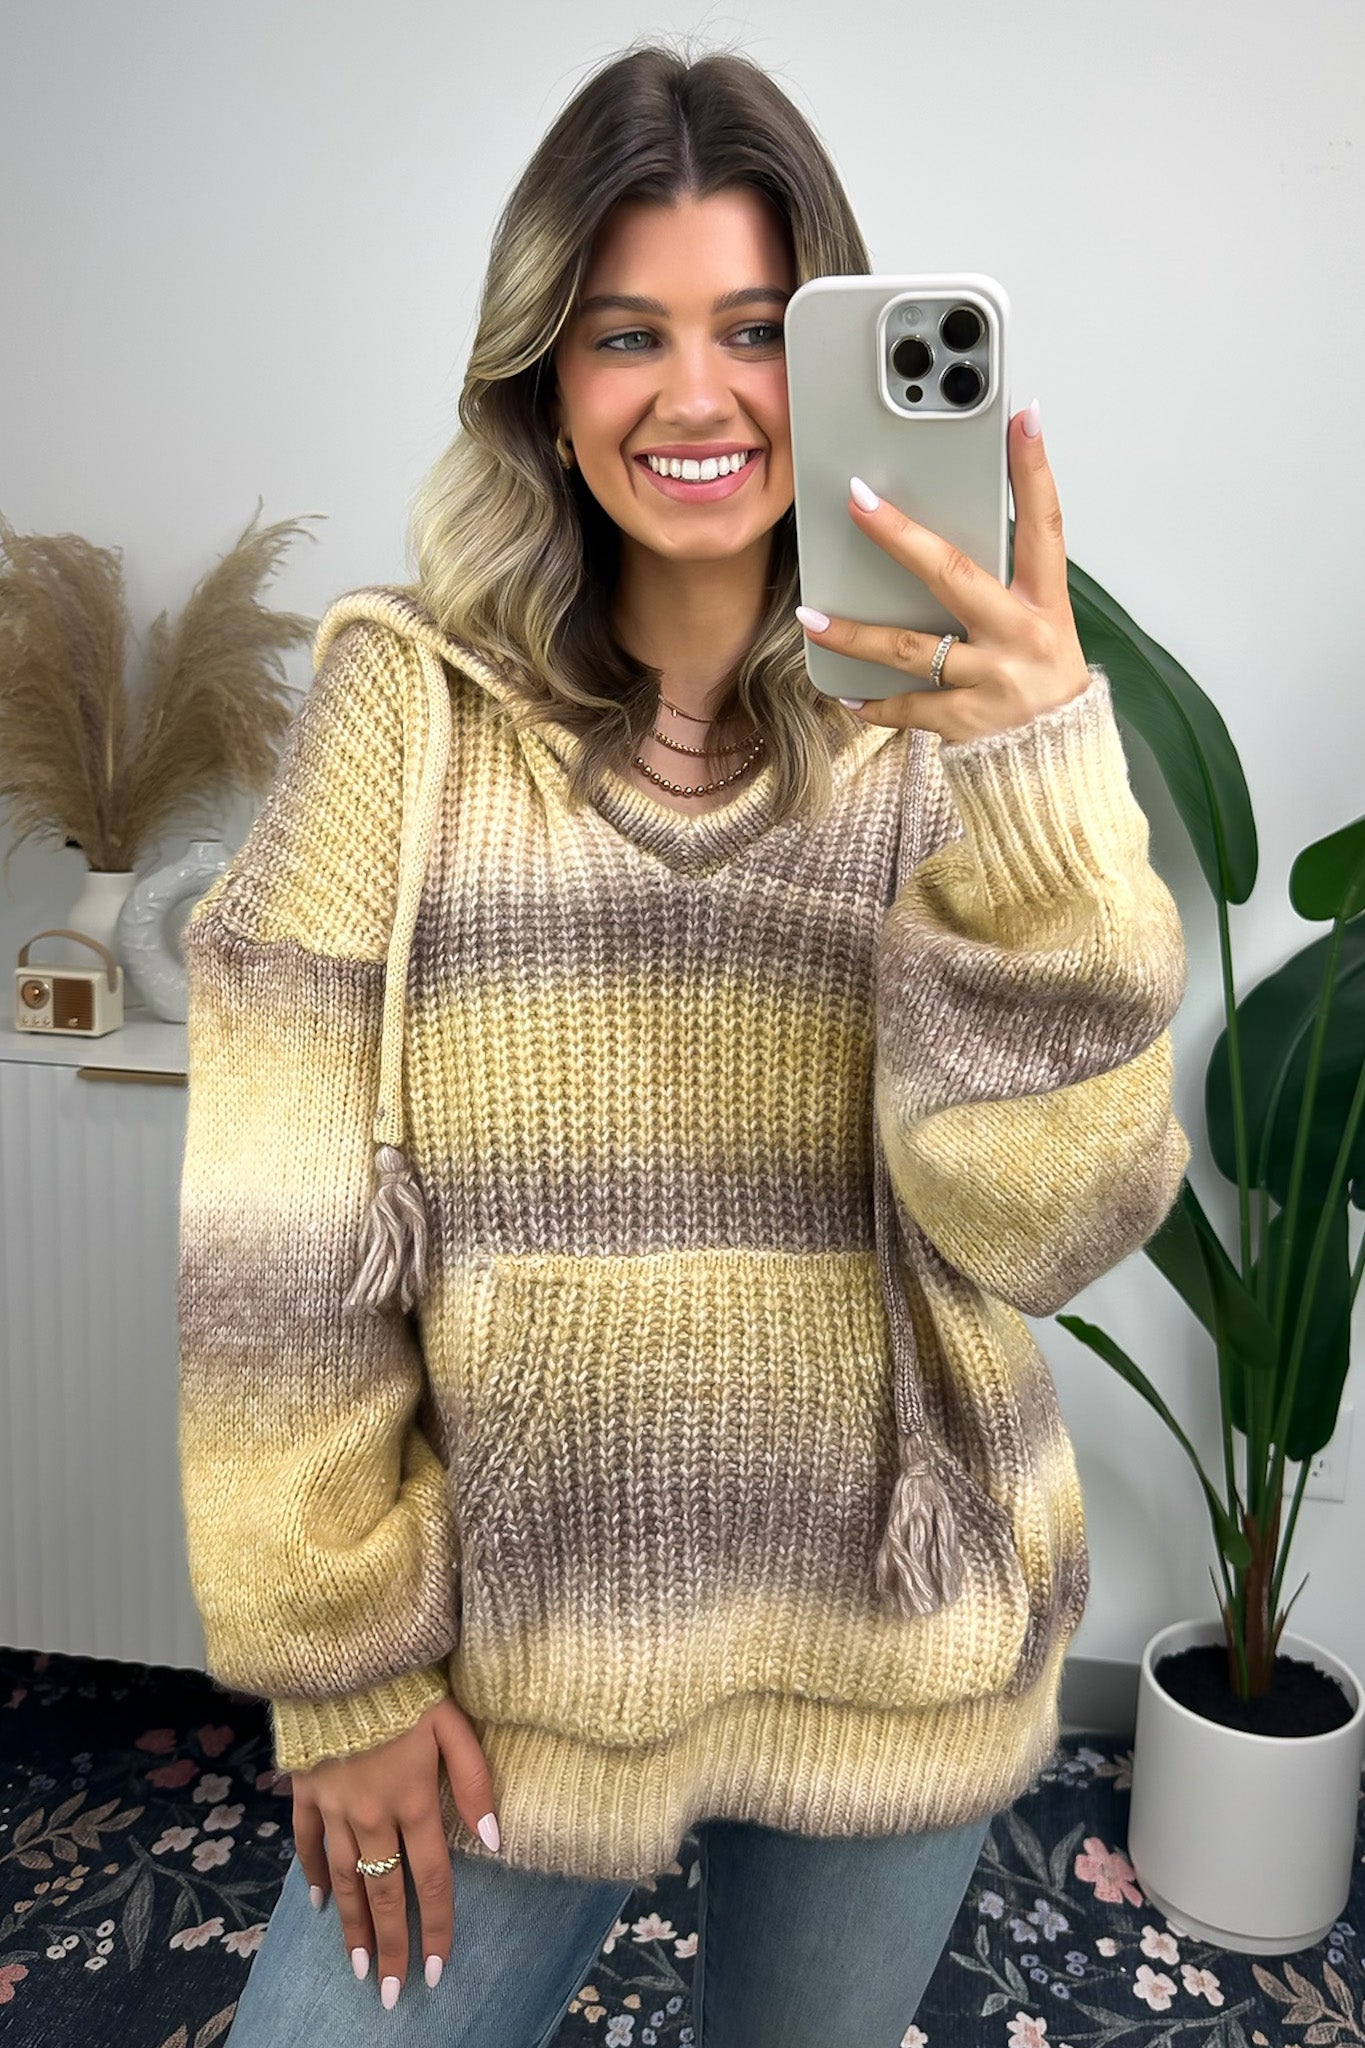  Flourishing Vibe Ombre Knit Hooded Sweater - FINAL SALE - Madison and Mallory